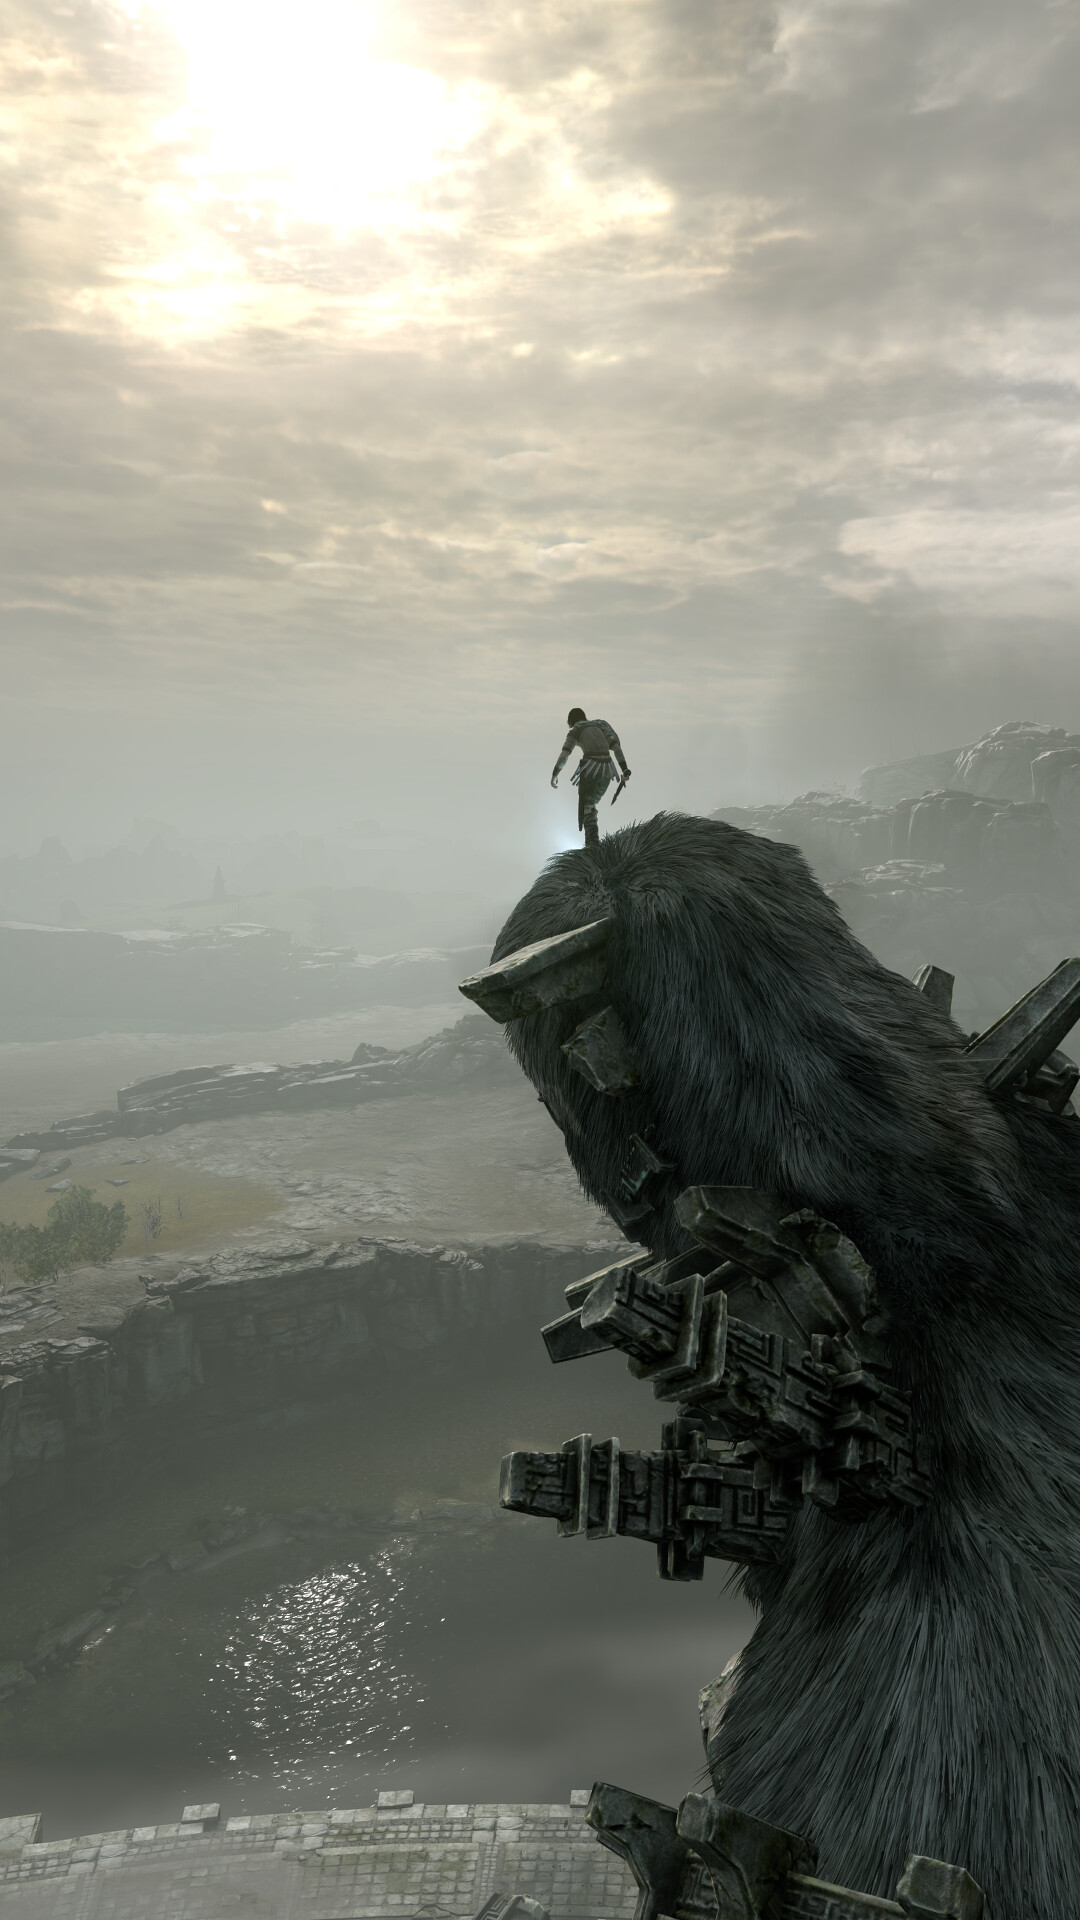 Shadow of the Colossus: A remake of the original game developed by Team Ico. 1080x1920 Full HD Wallpaper.